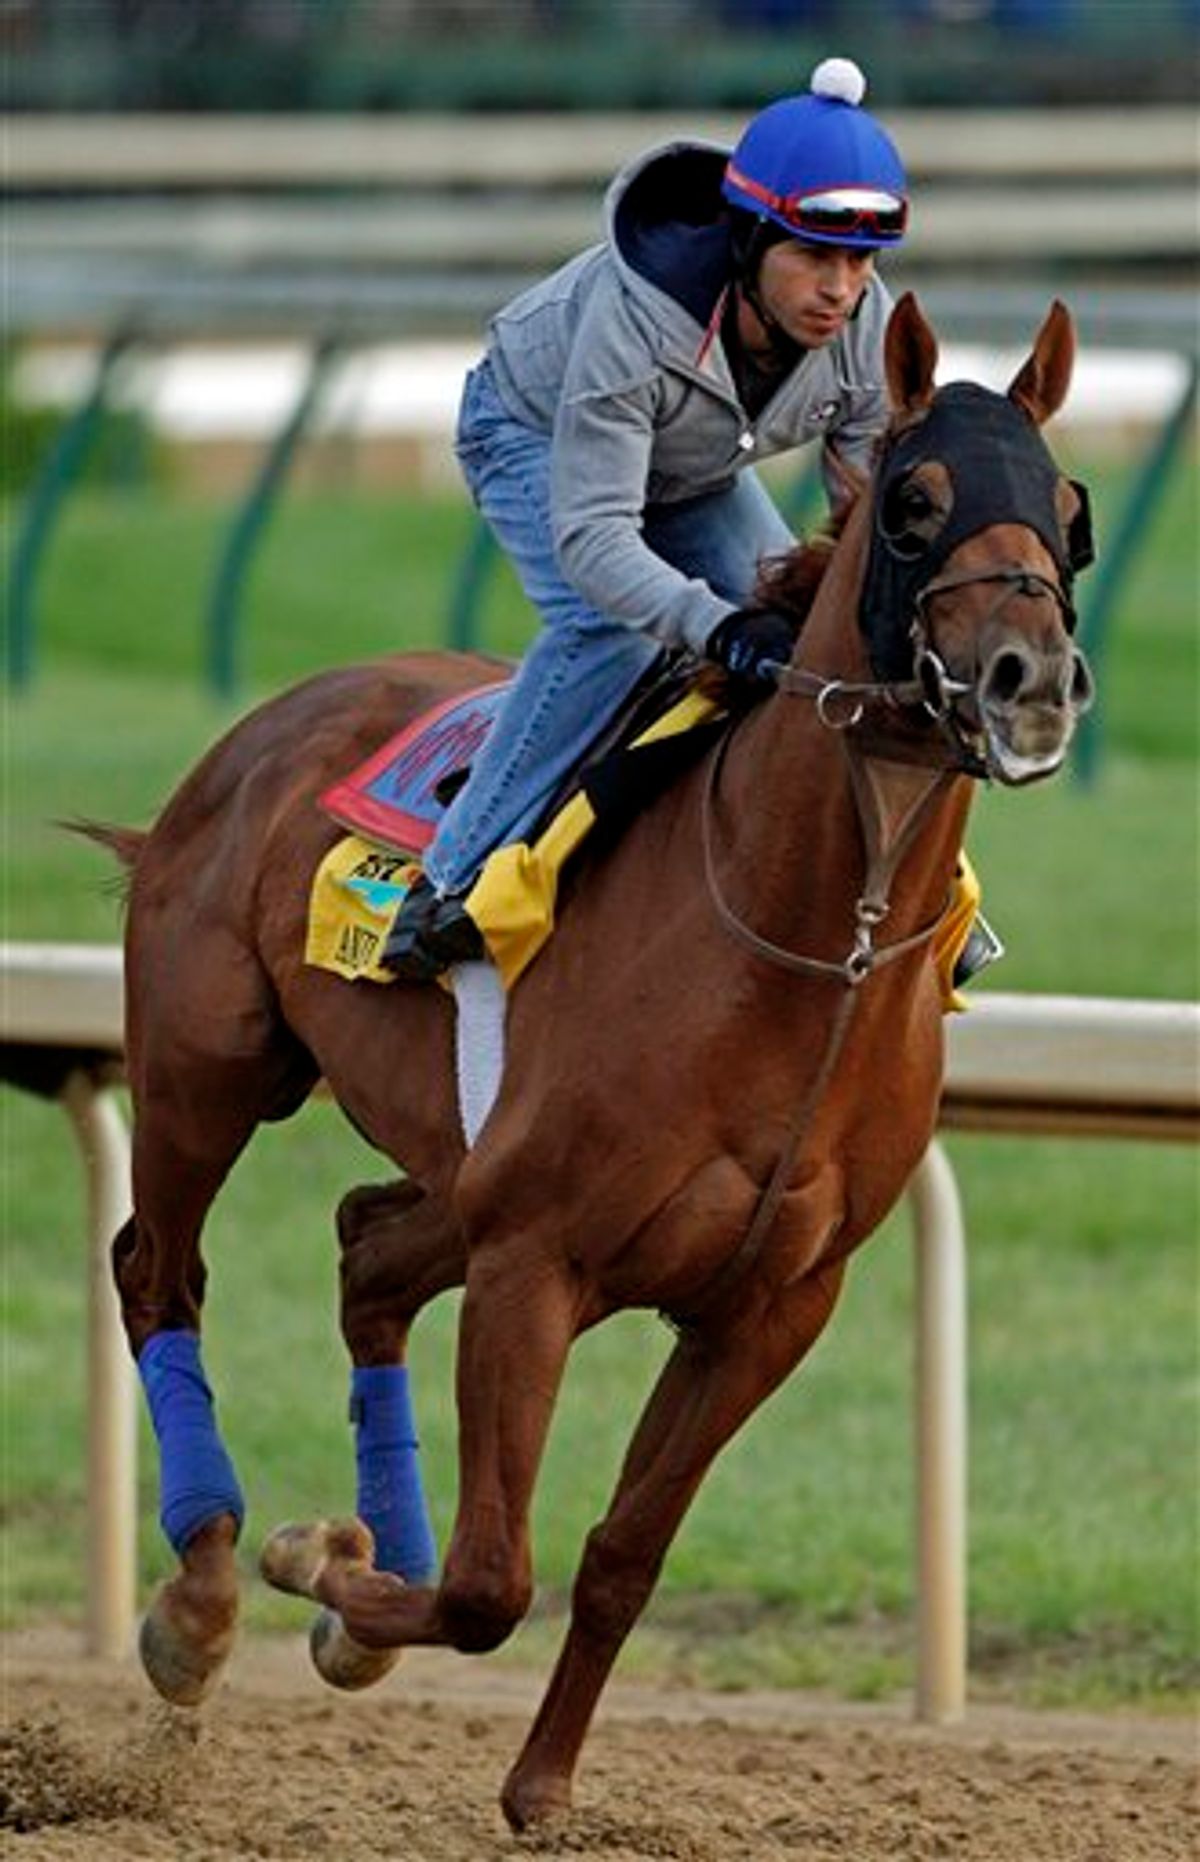 Exercise rider James Slater takes Kentucky Derby entrant Animal Kingdom for a workout at Churchill Downs Friday, May 6, 2011, in Louisville, Ky. (AP Photo/Denis Paquin) (AP)